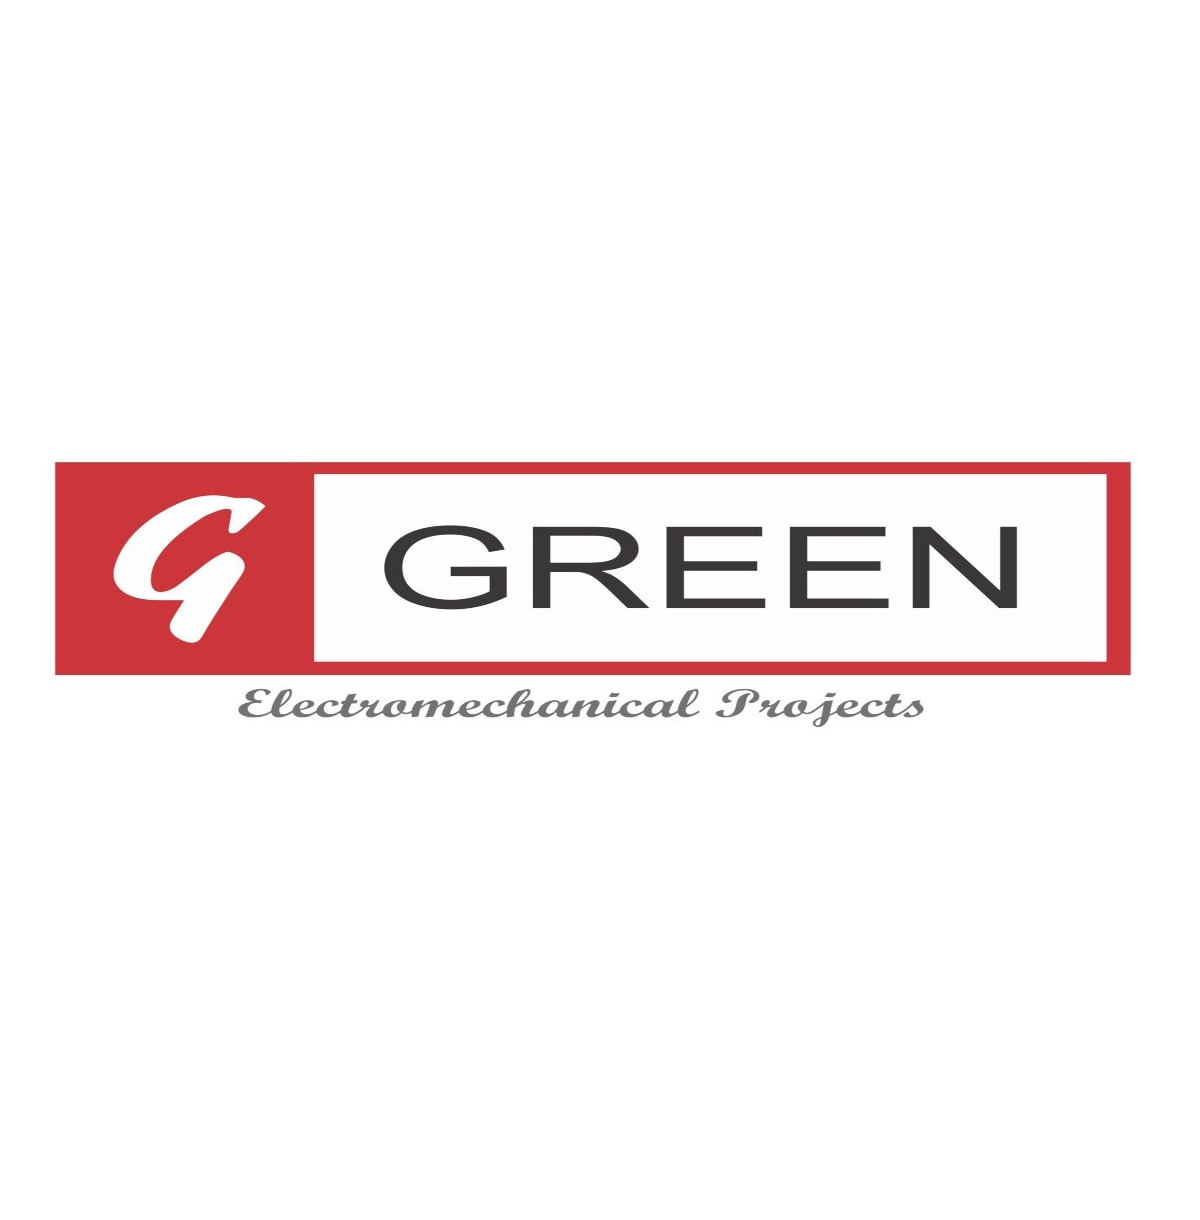 Green Electromechanical Projects